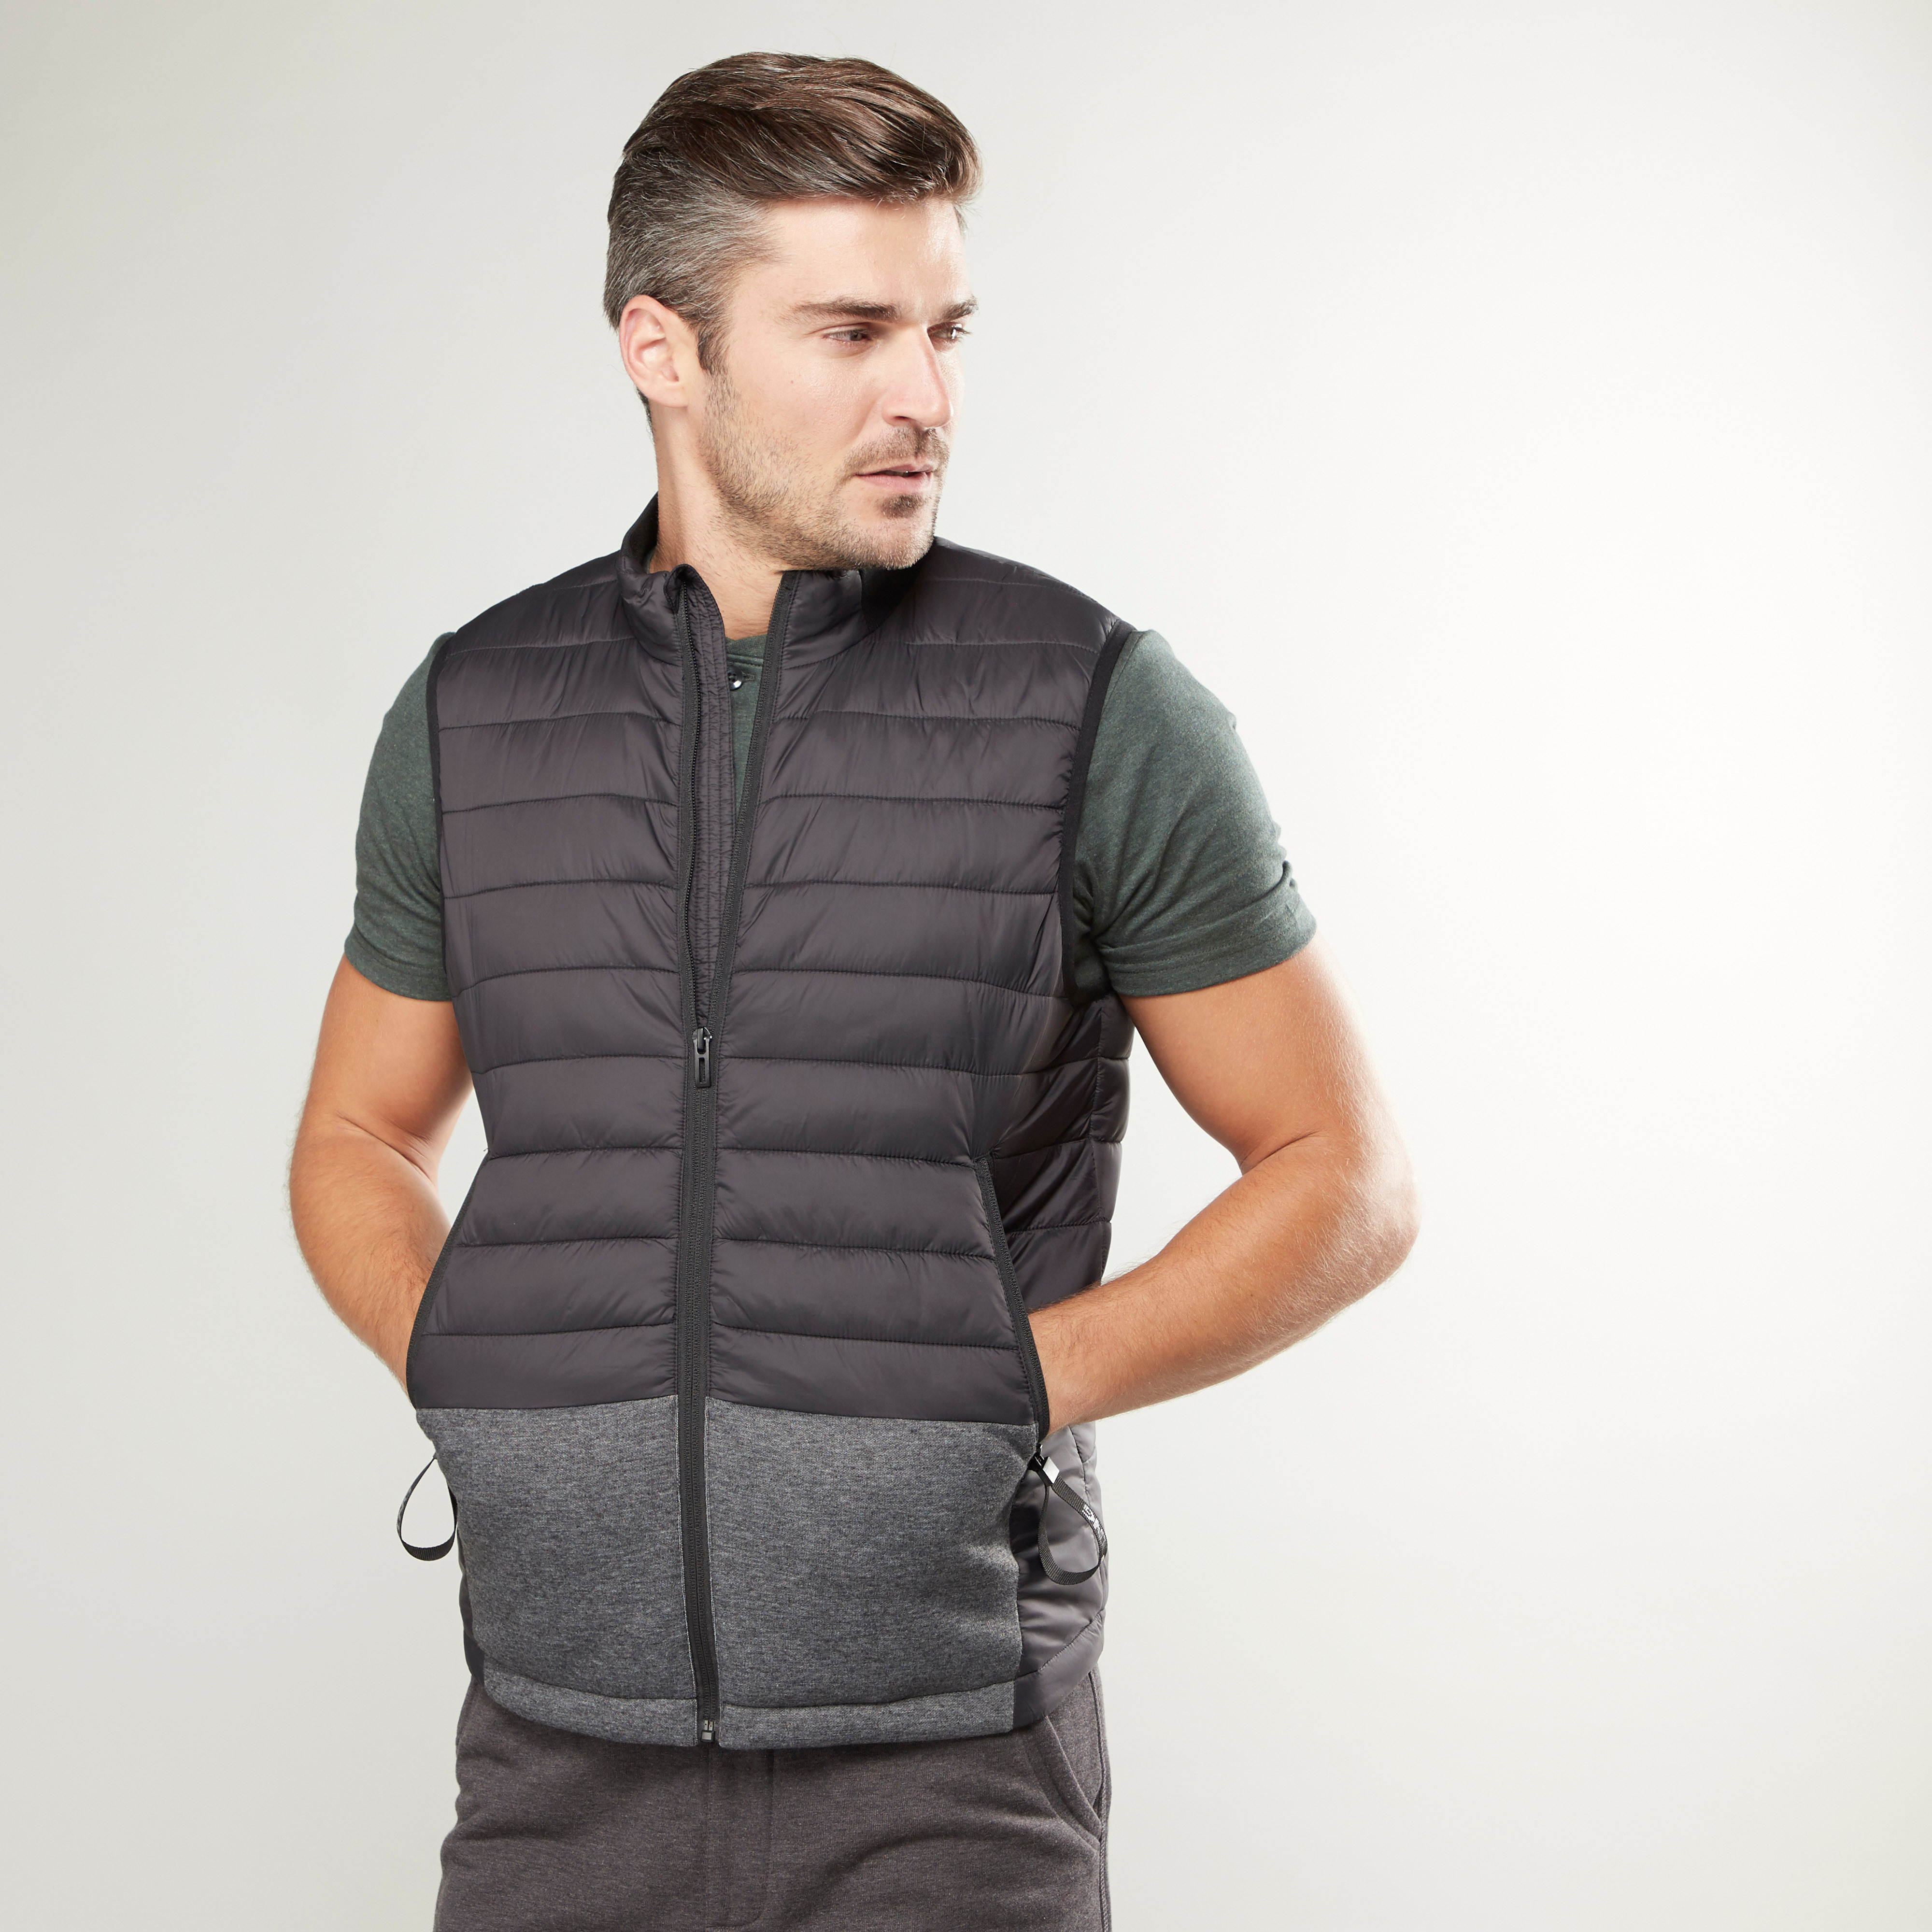 Monclair Designer Unisex Down Vest Jacket With Luxury Embroidery Badge  Sleeveless Mens Outerwear For Top Quality F0BE# From Northjacket, $41.94 |  DHgate.Com